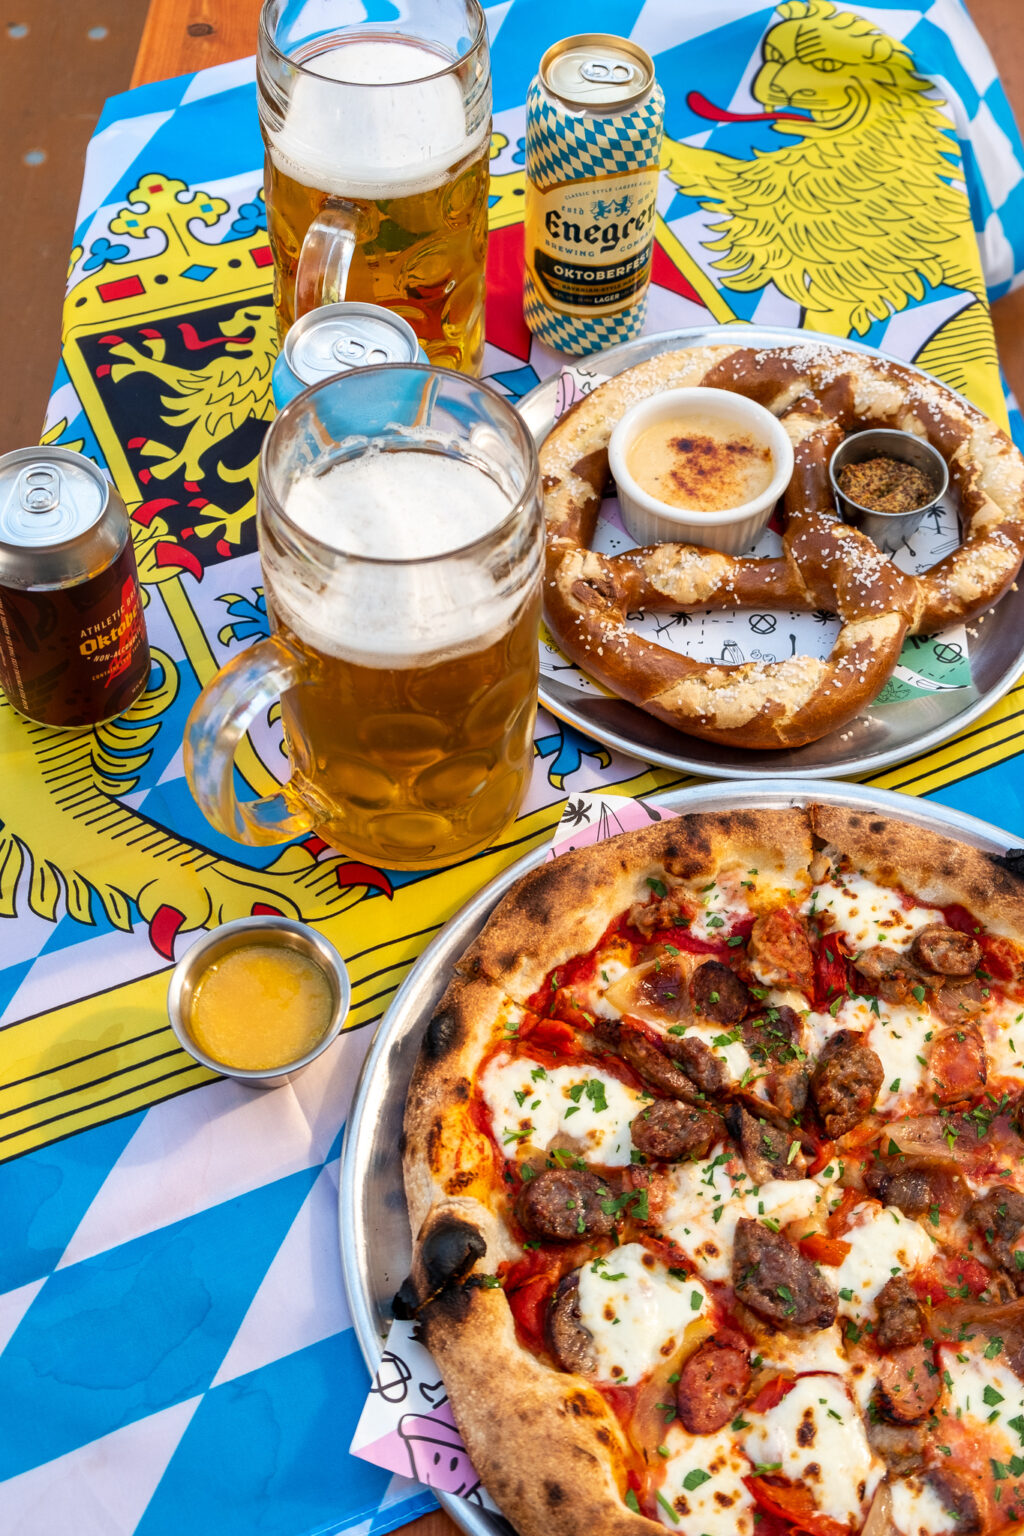 Pitfire Pizza's flagship location in the NoHo Arts District transforms its outdoor patio into a full Oktoberfest beer garden, weekends September 24-October 9.